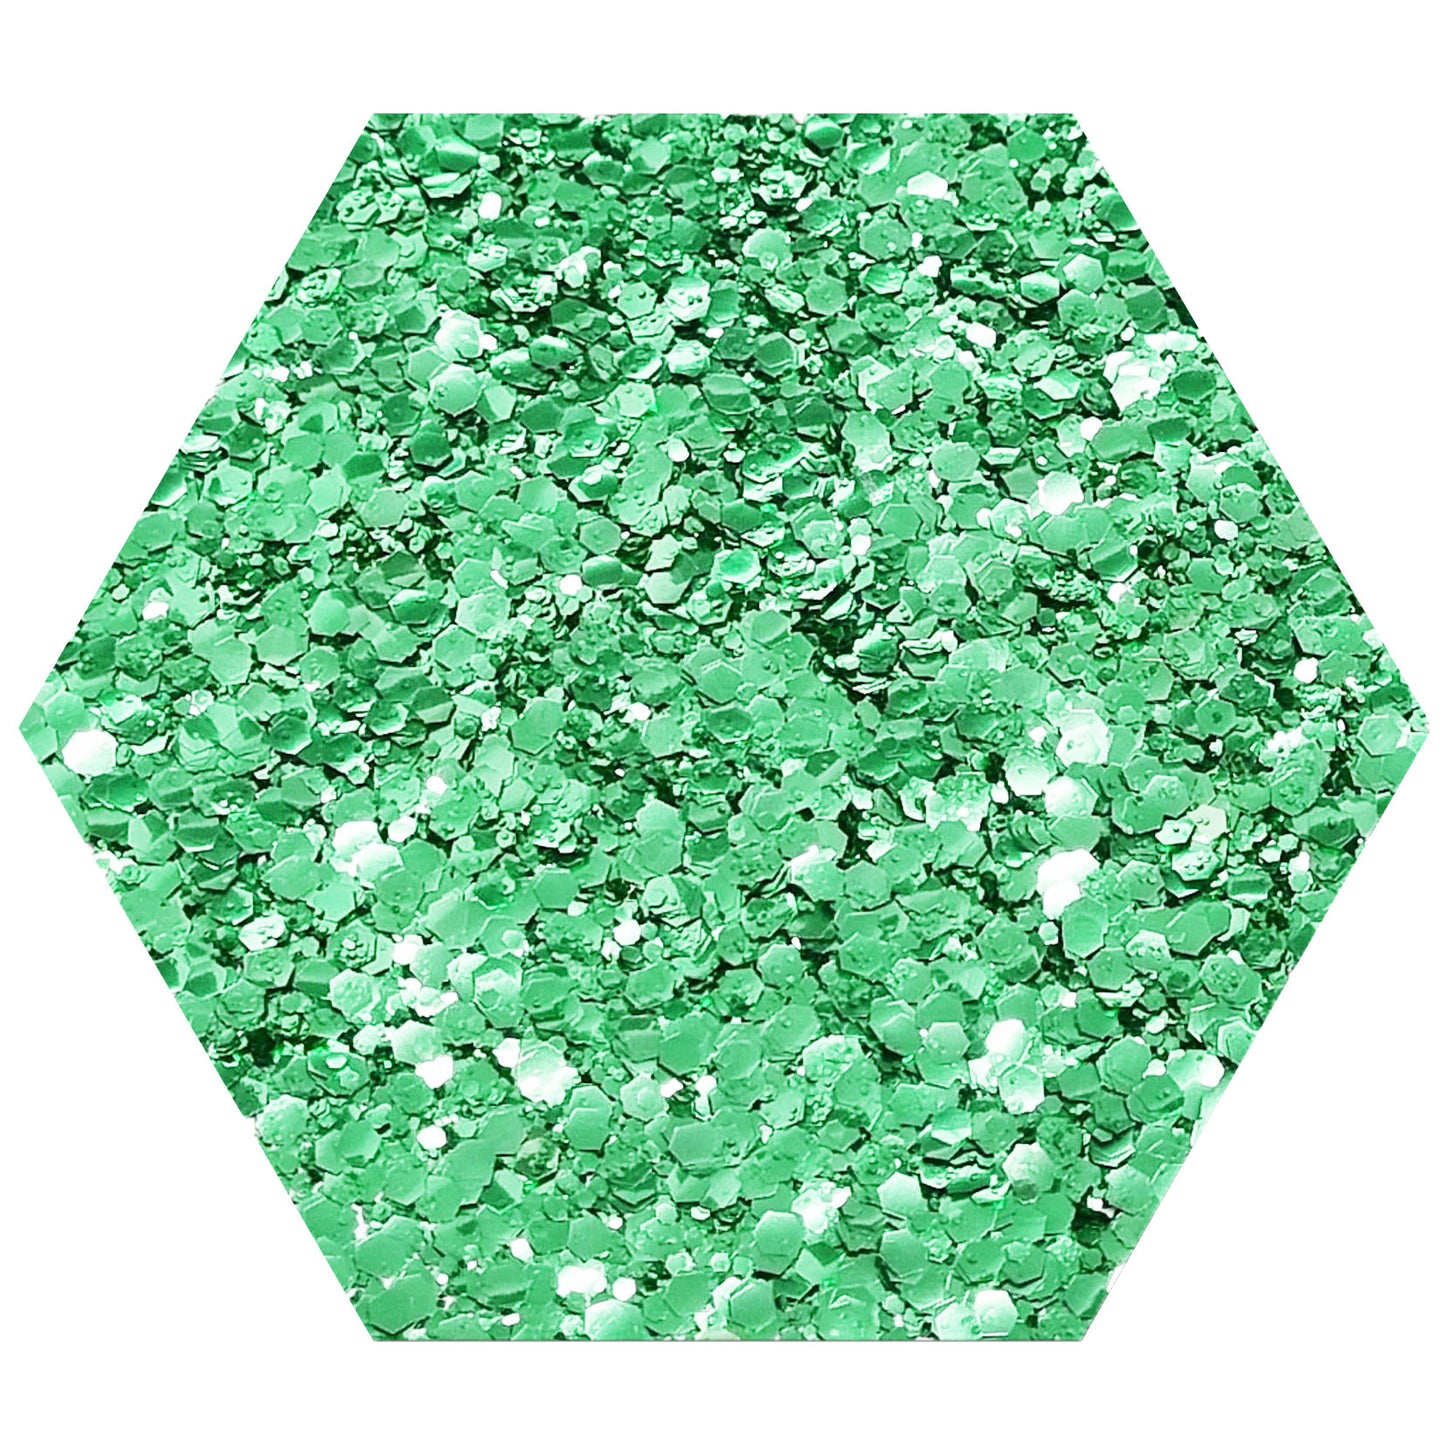 Spring Green Biodegradable Cosmetic Glitter | Mix | Truly Personal | Wax Melt Bath Bombs Soap